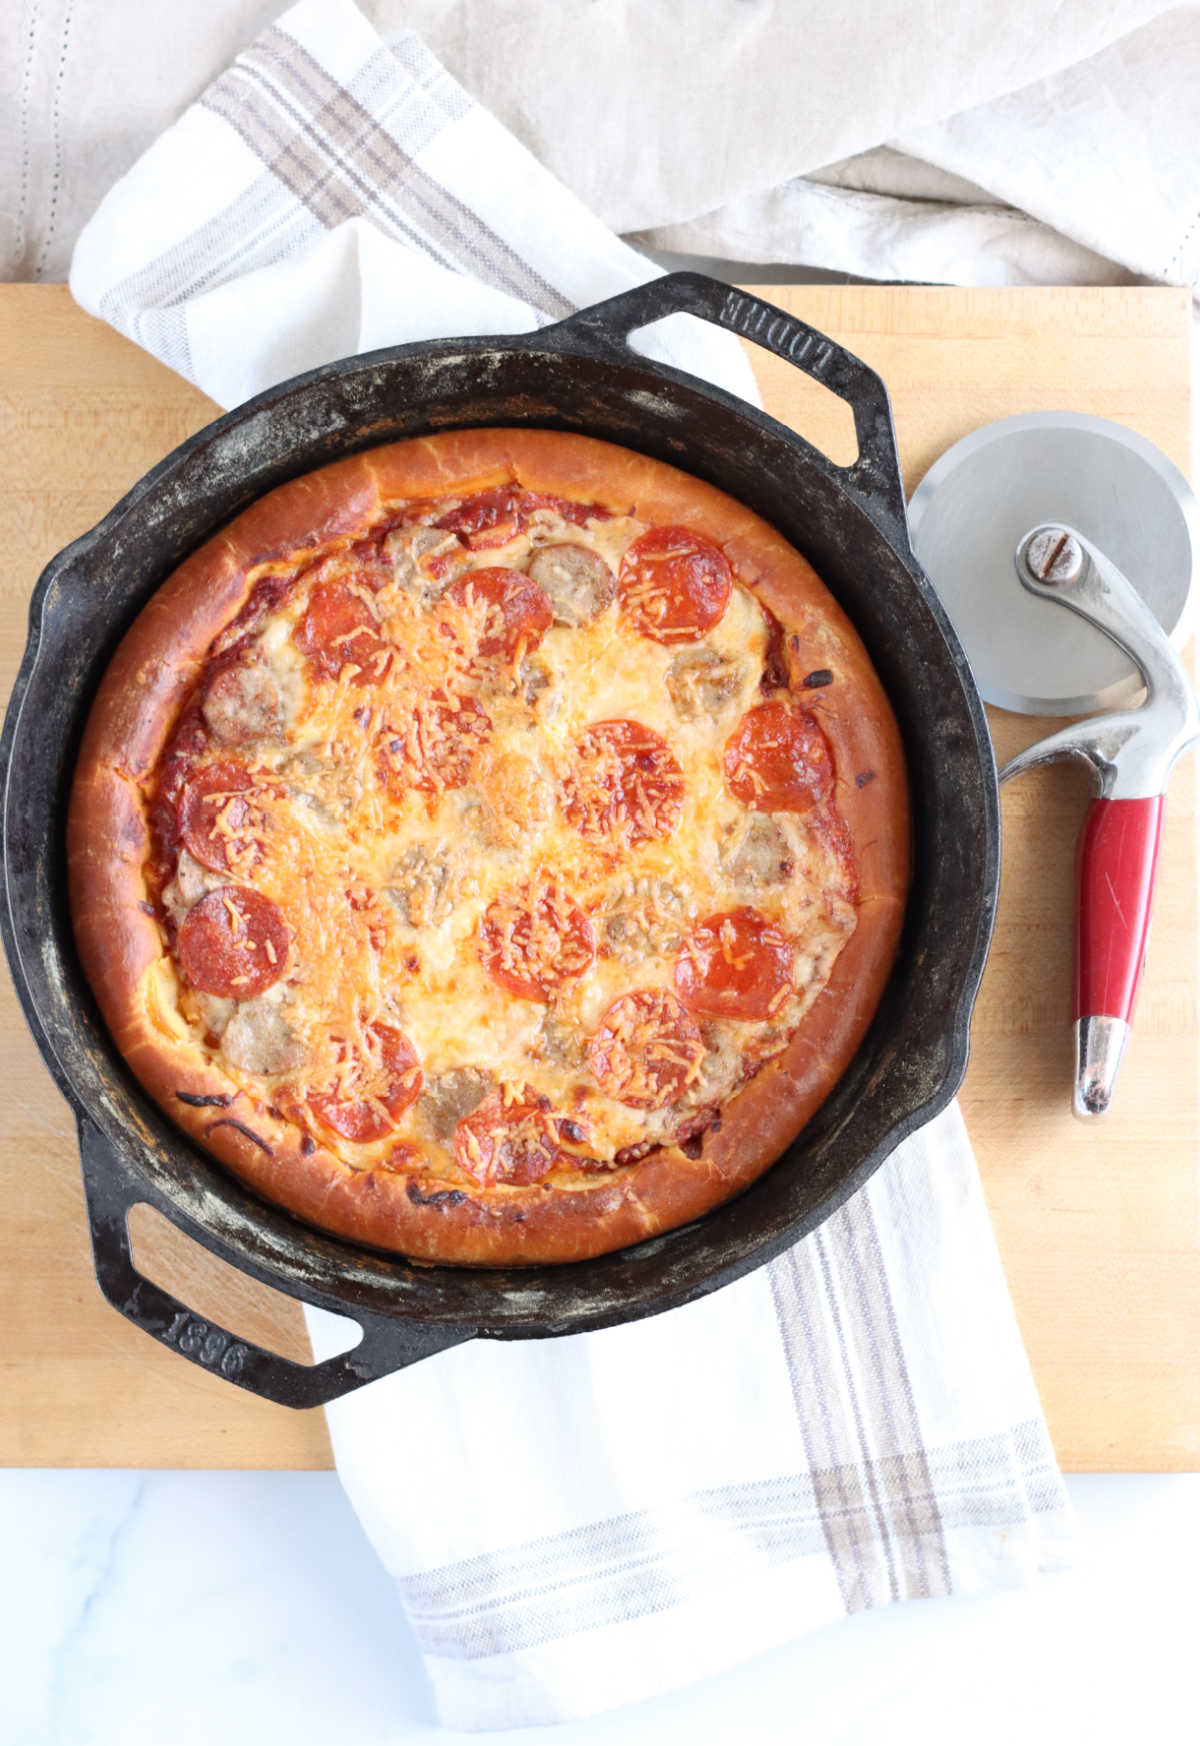 Homemade pizza in a dual handle cast iron skillet with pepperoni and golden brown cheese.